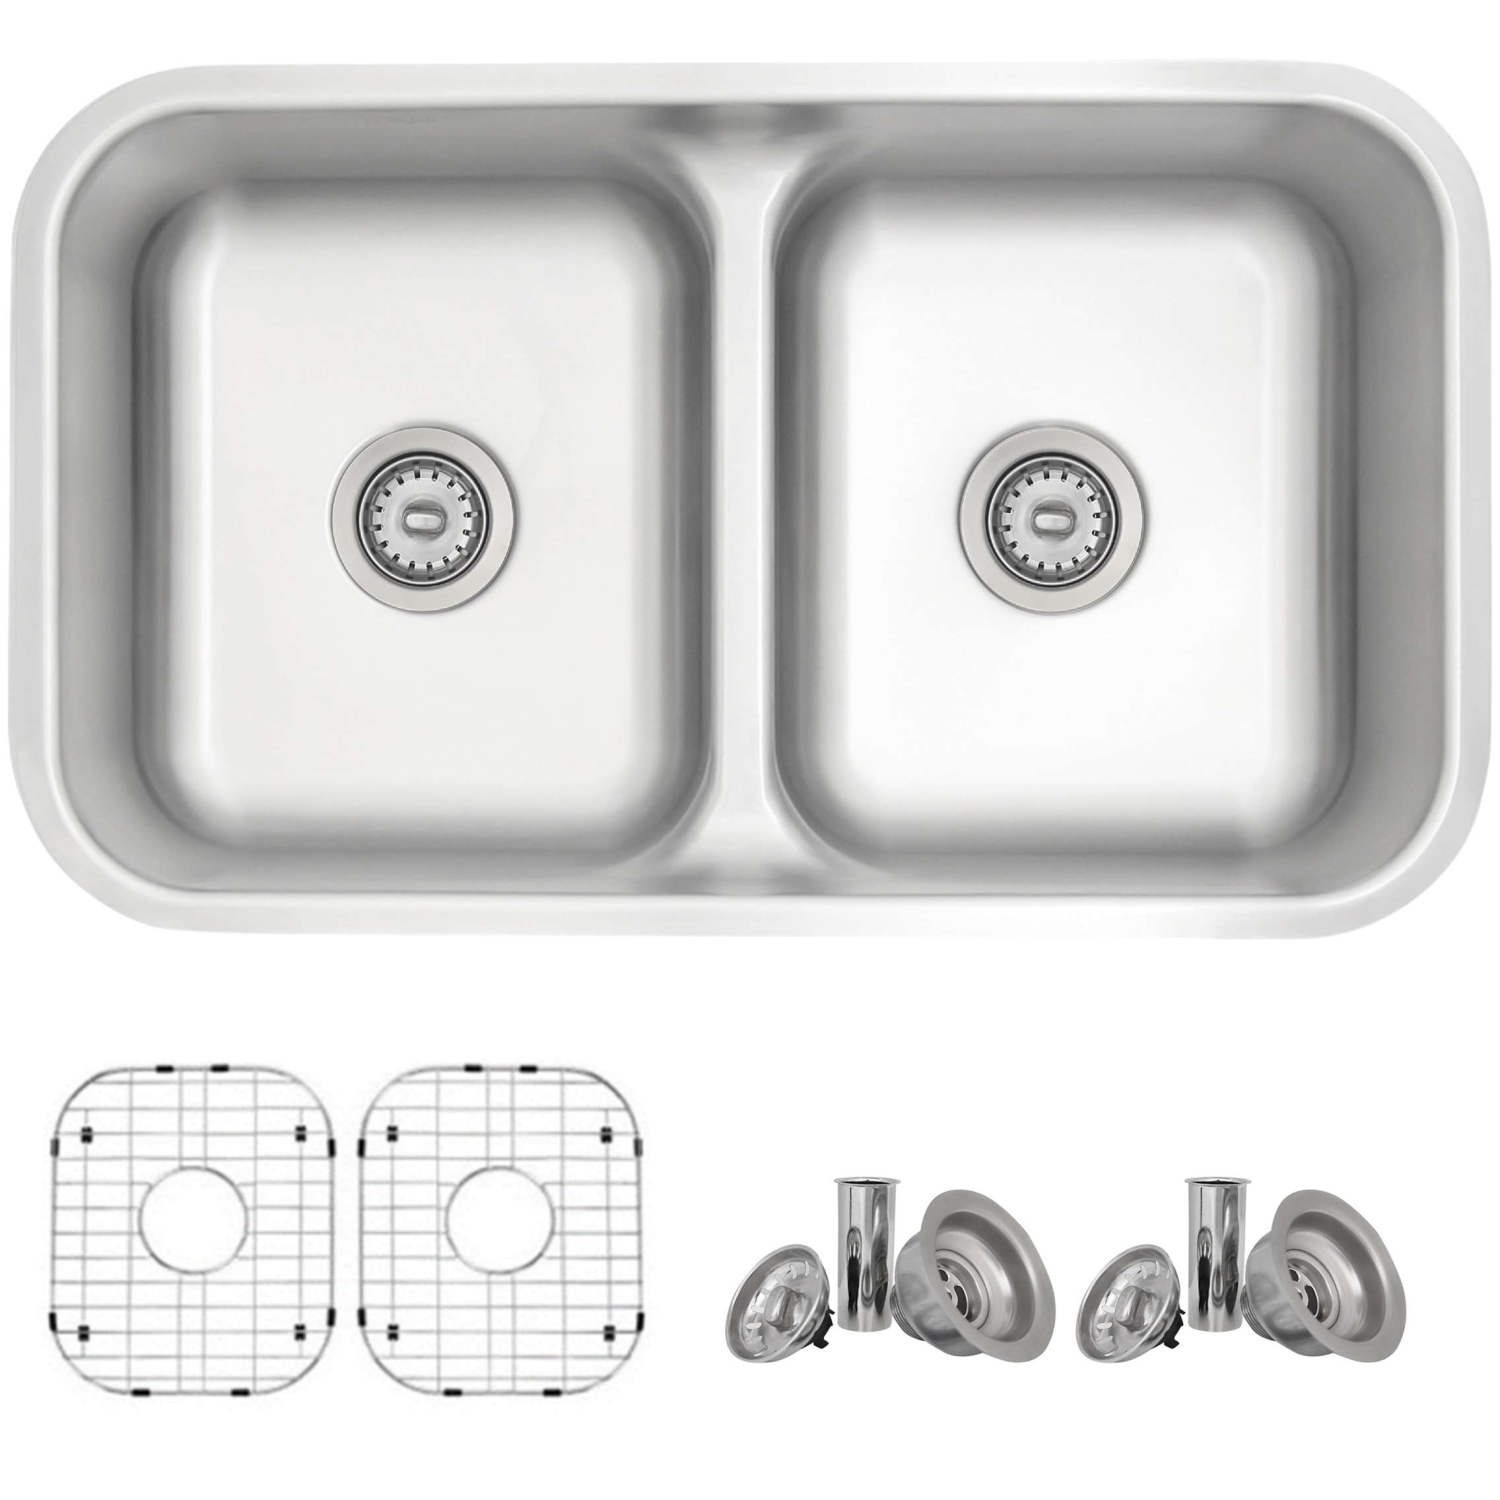 OPEN BOX - Dual-Mount 32 1/4" Stainless Steel Double Bowl Kitchen Sink with grids and strainers, S-202XTG - GRADE A